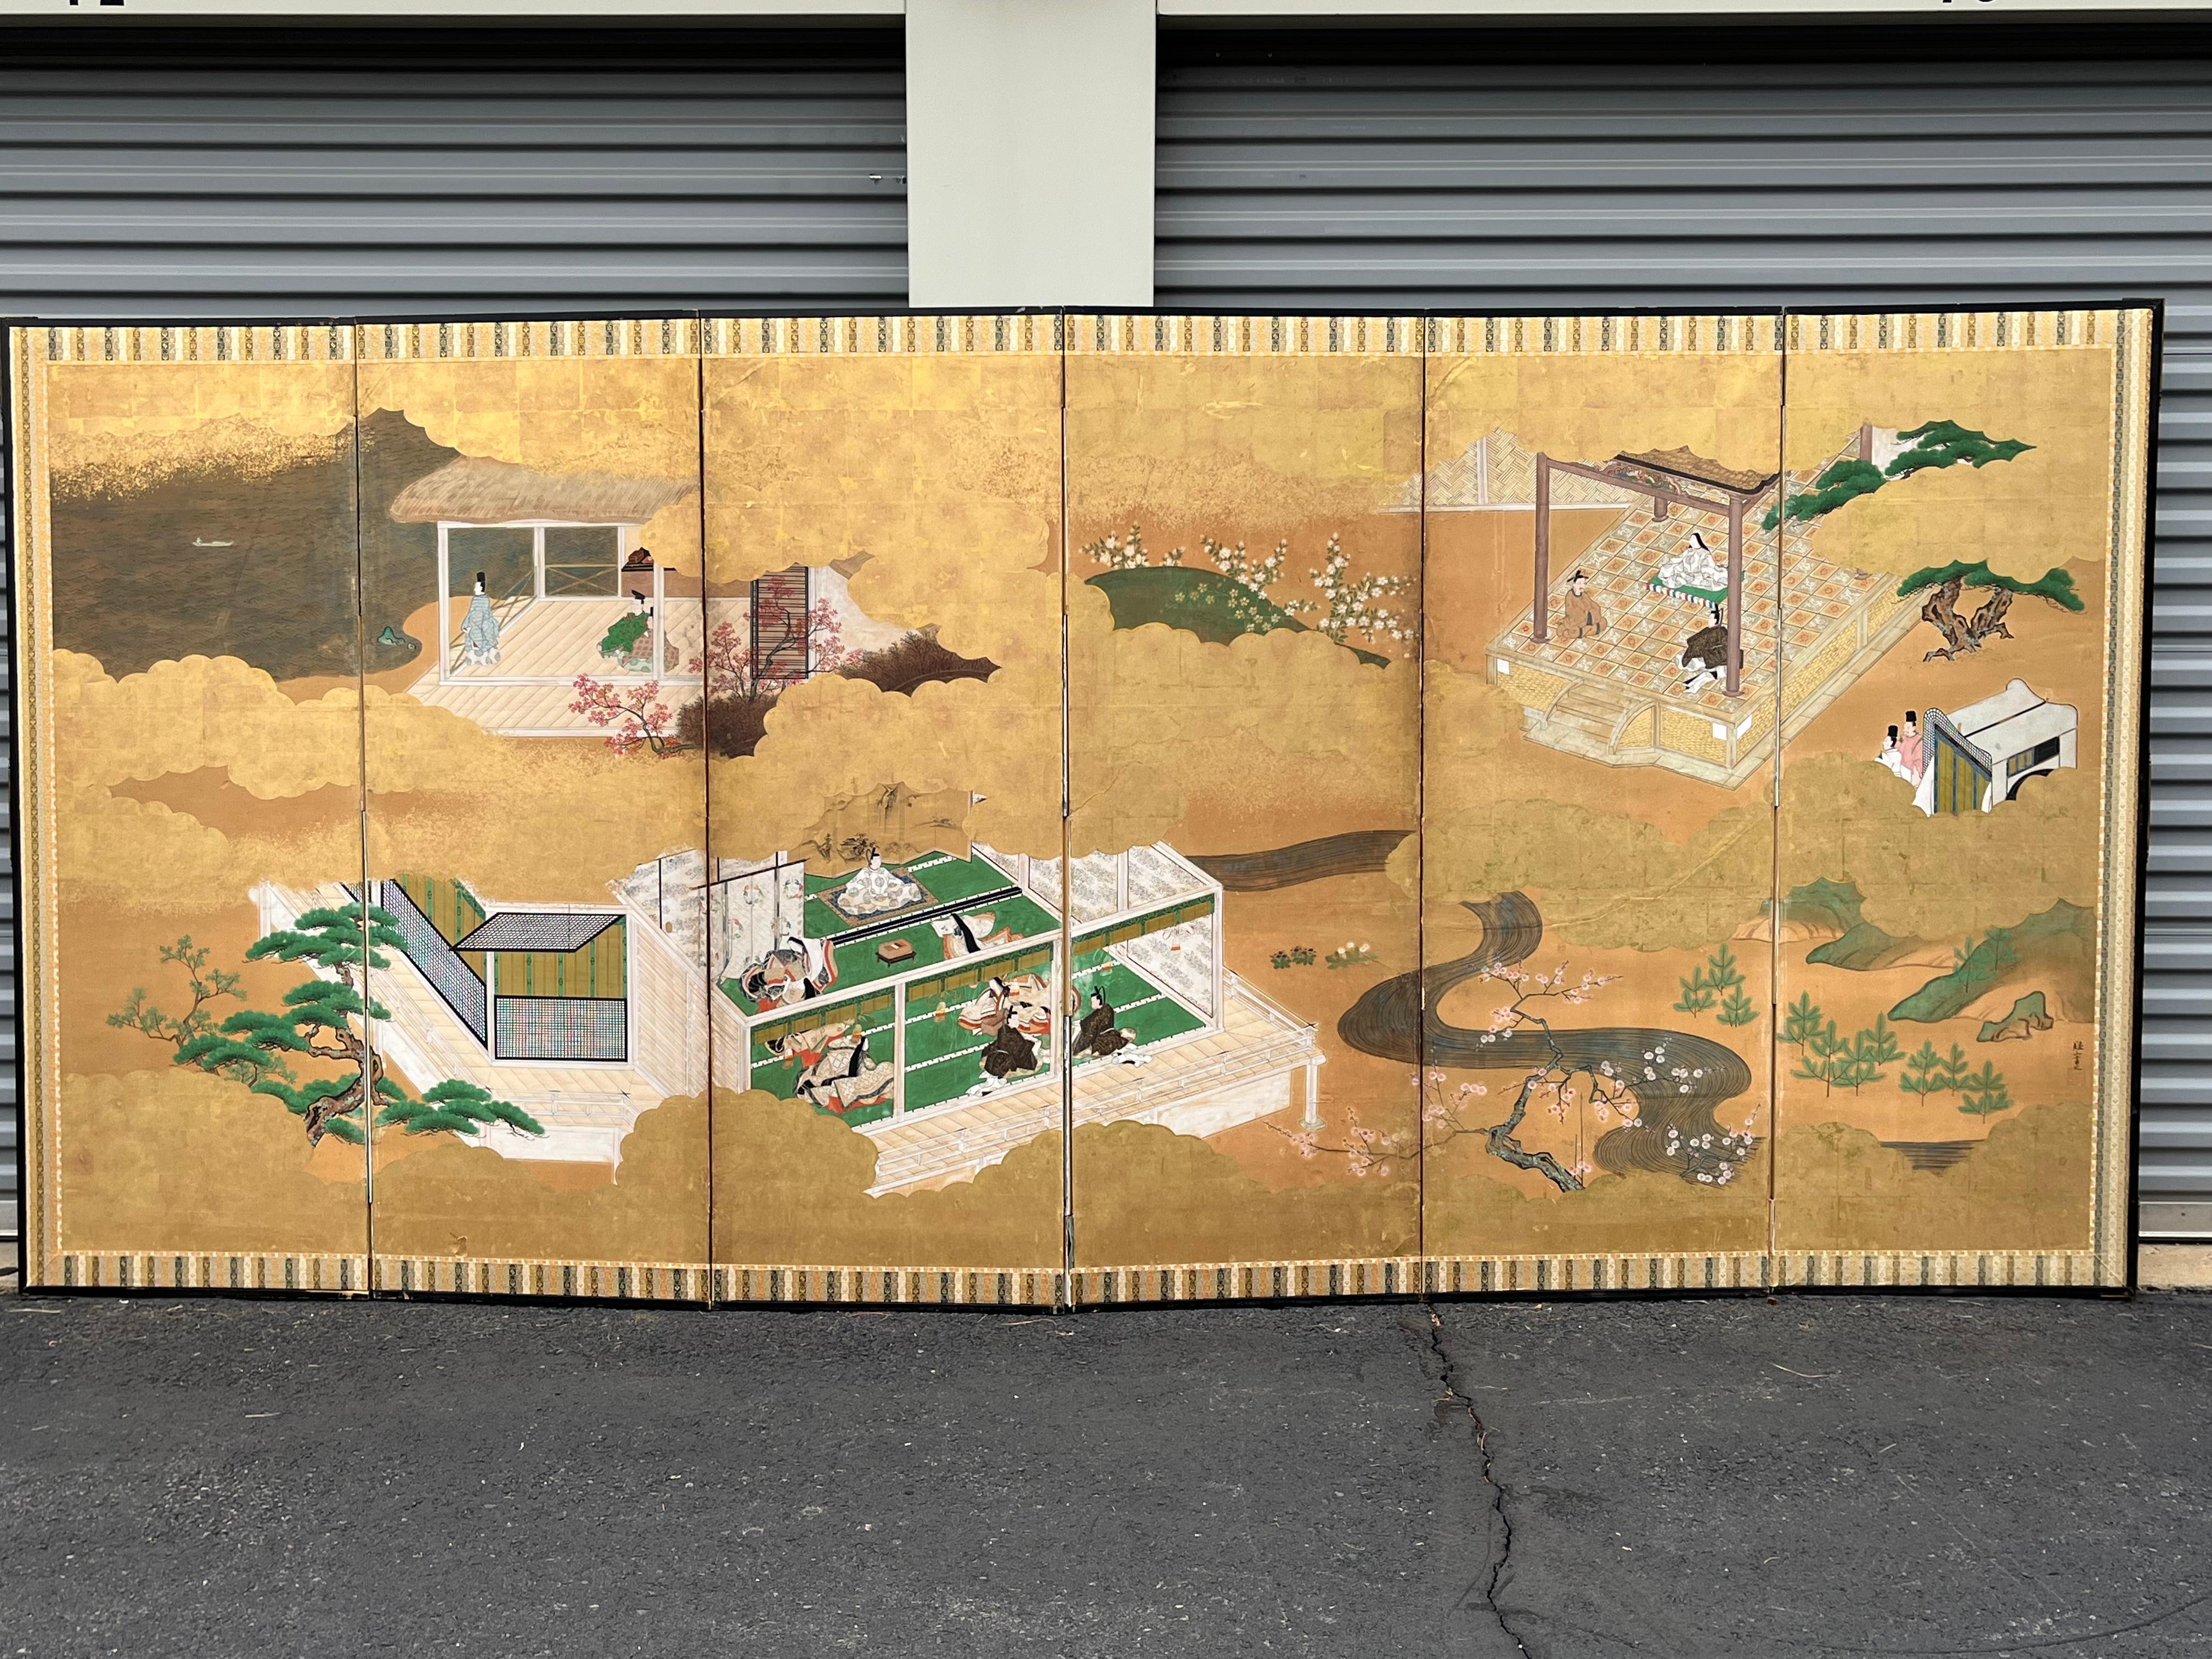 A Japanese 19th century 6-panel folding screen in gold leaf and watercolor on paper, depicting scenes of the life of Genji. Sold at Sotheby's Oct. 17, 2015.